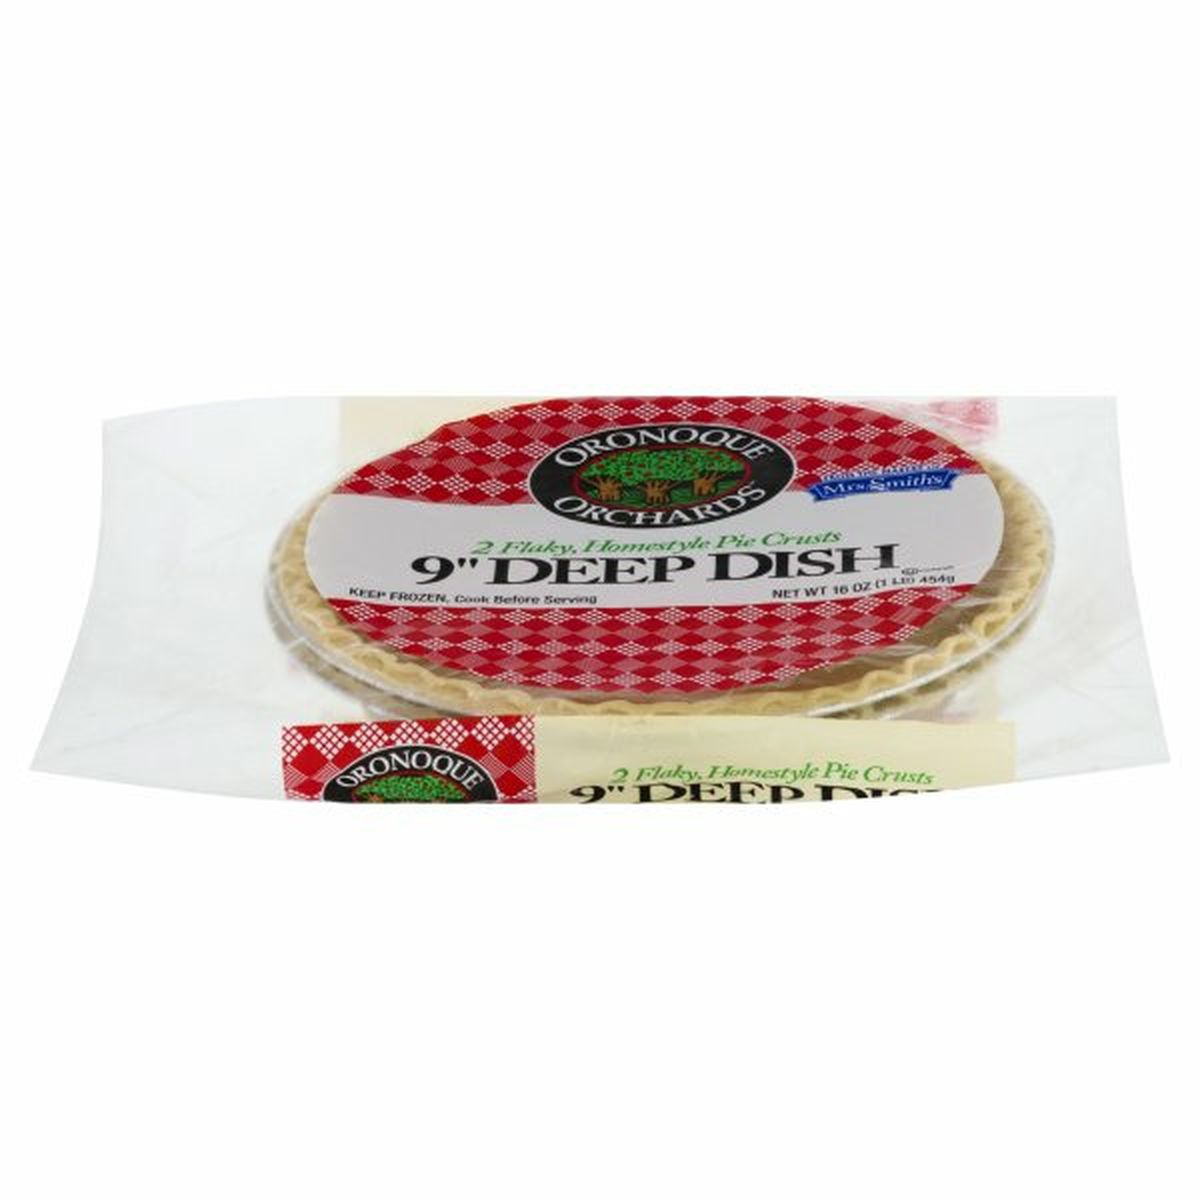 Calories in Oronoque Orchards Pie Crusts, Deep Dish, 9 Inch